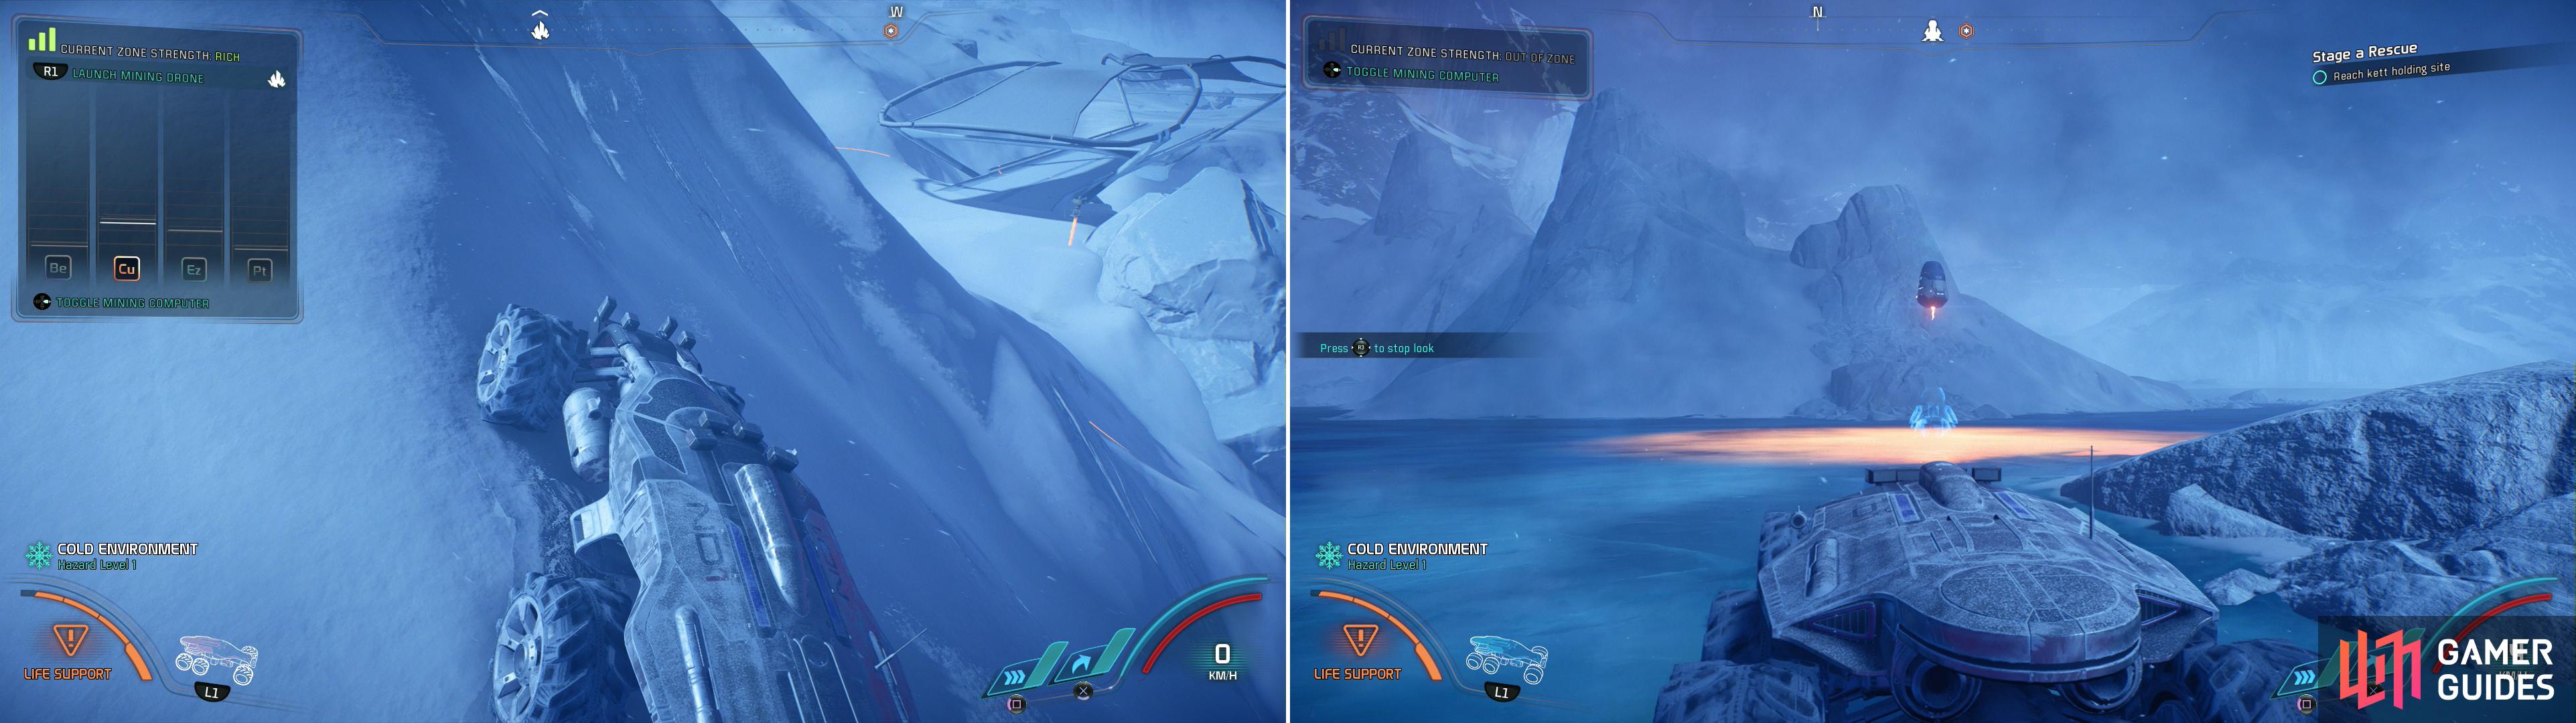 If youre willing to drive… creatively… you can find more rare minerals at a Mining Zone past a bridge (left). Drive onto a frozen lake to deploy another Forward Station (right).